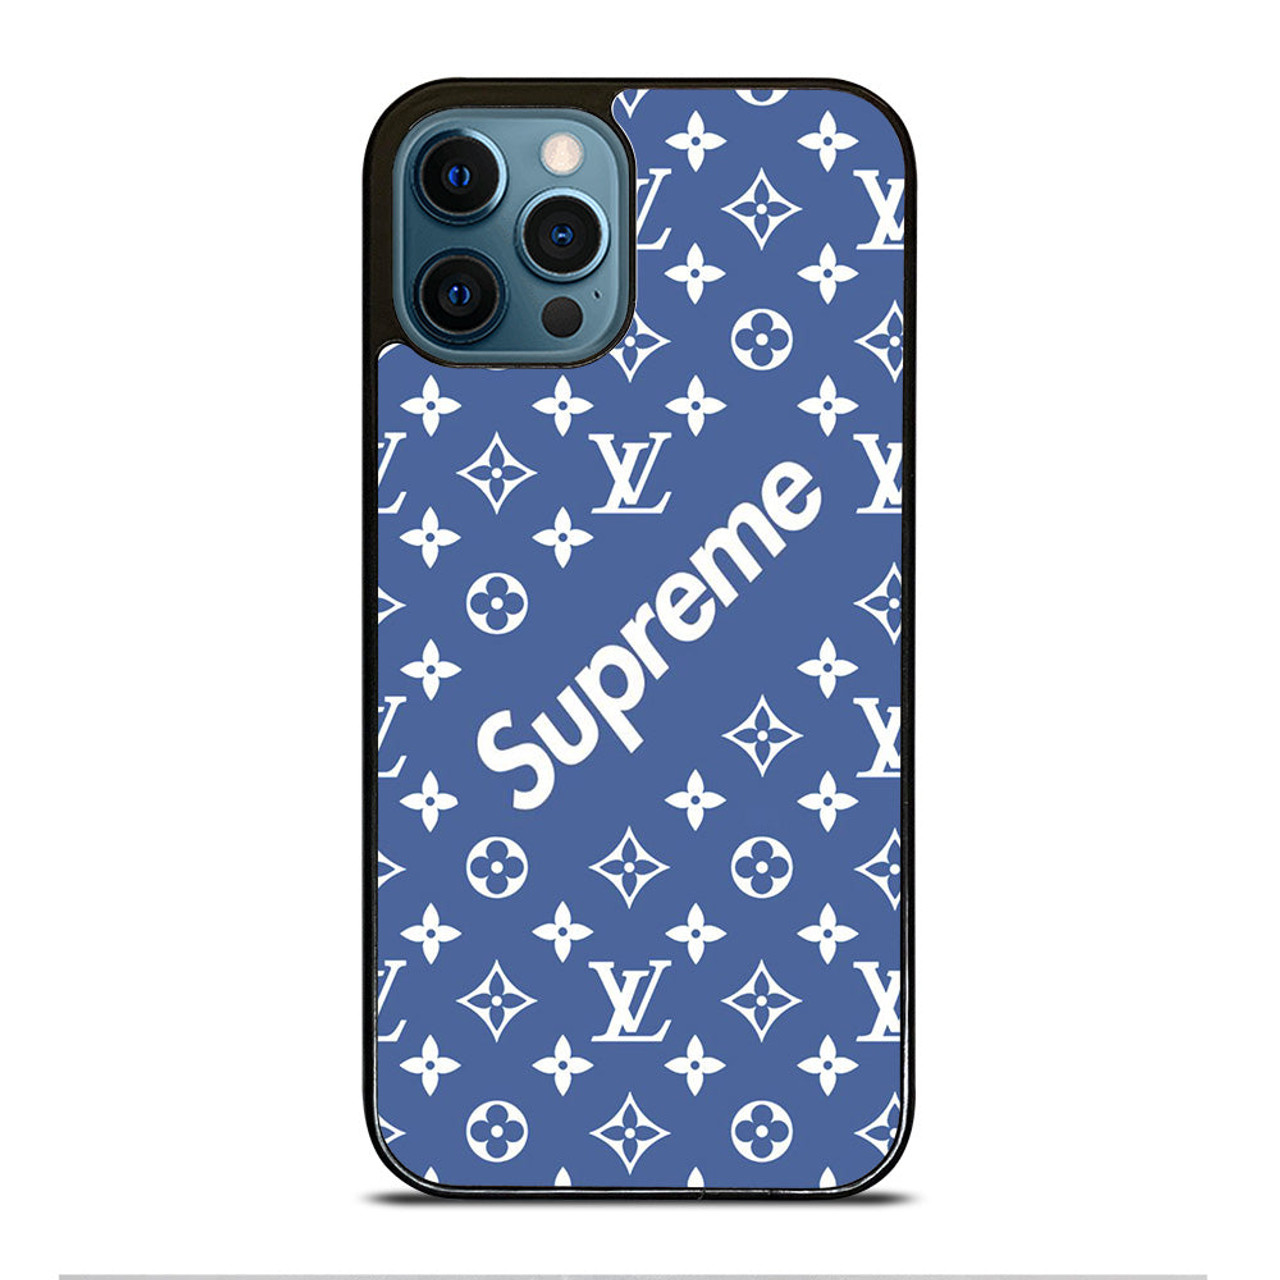 NEW SUPREME BLUE PATTERN iPhone 12 Pro Max Case Cover